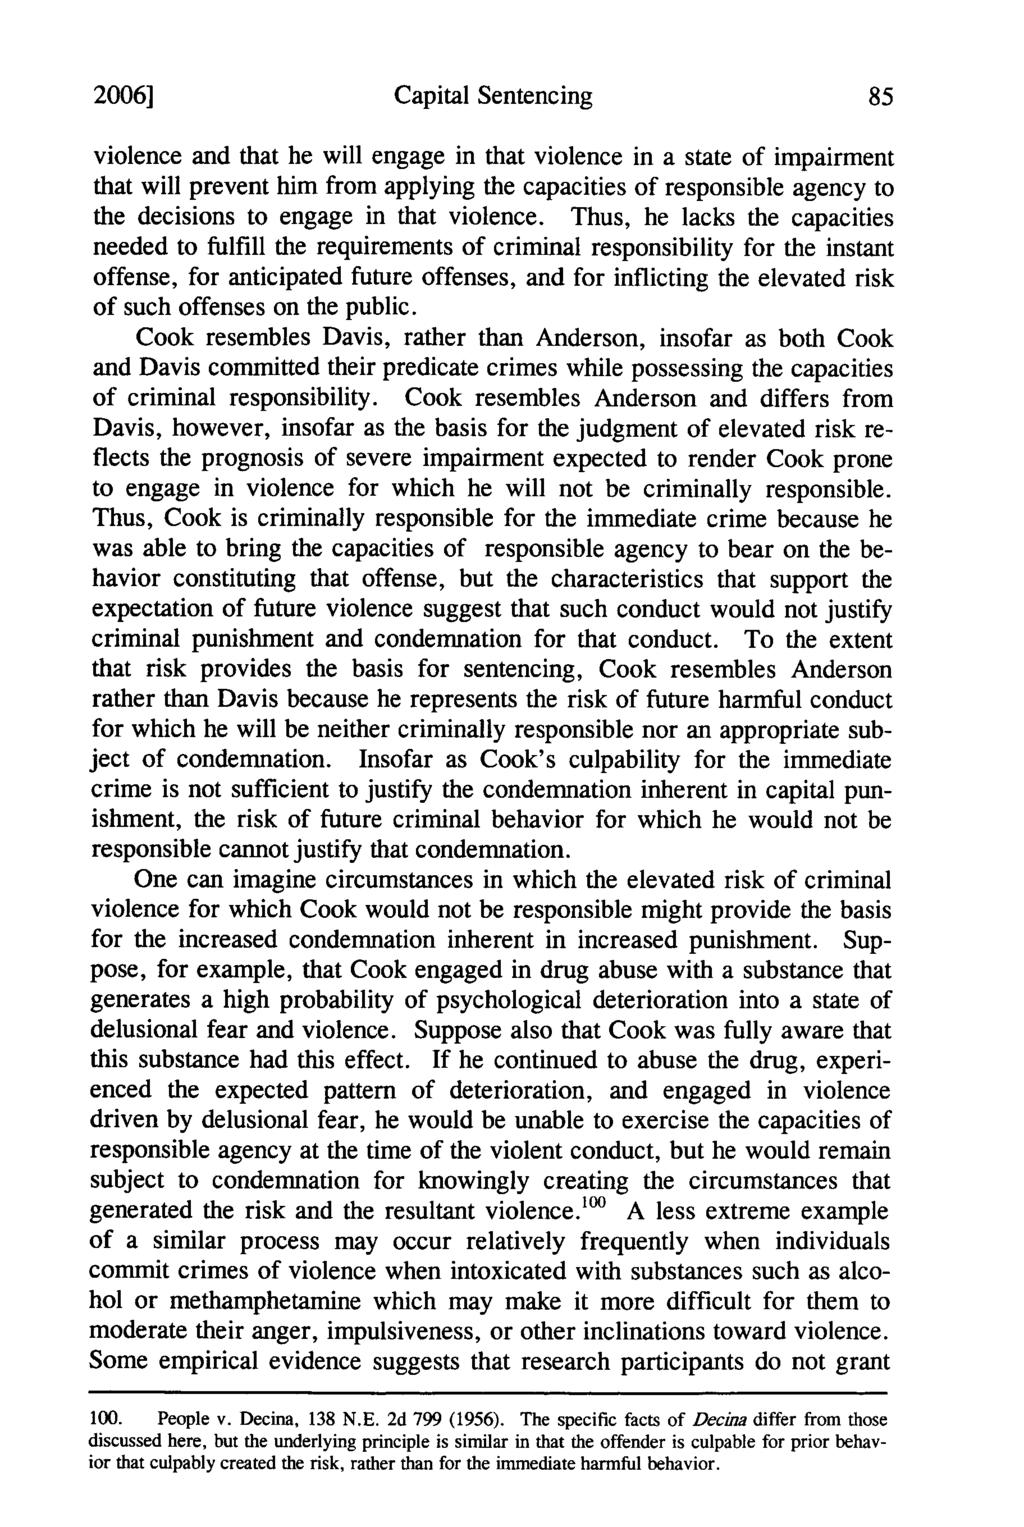 2006] Capital Sentencing violence and that he will engage in that violence in a state of impairment that will prevent him from applying the capacities of responsible agency to the decisions to engage